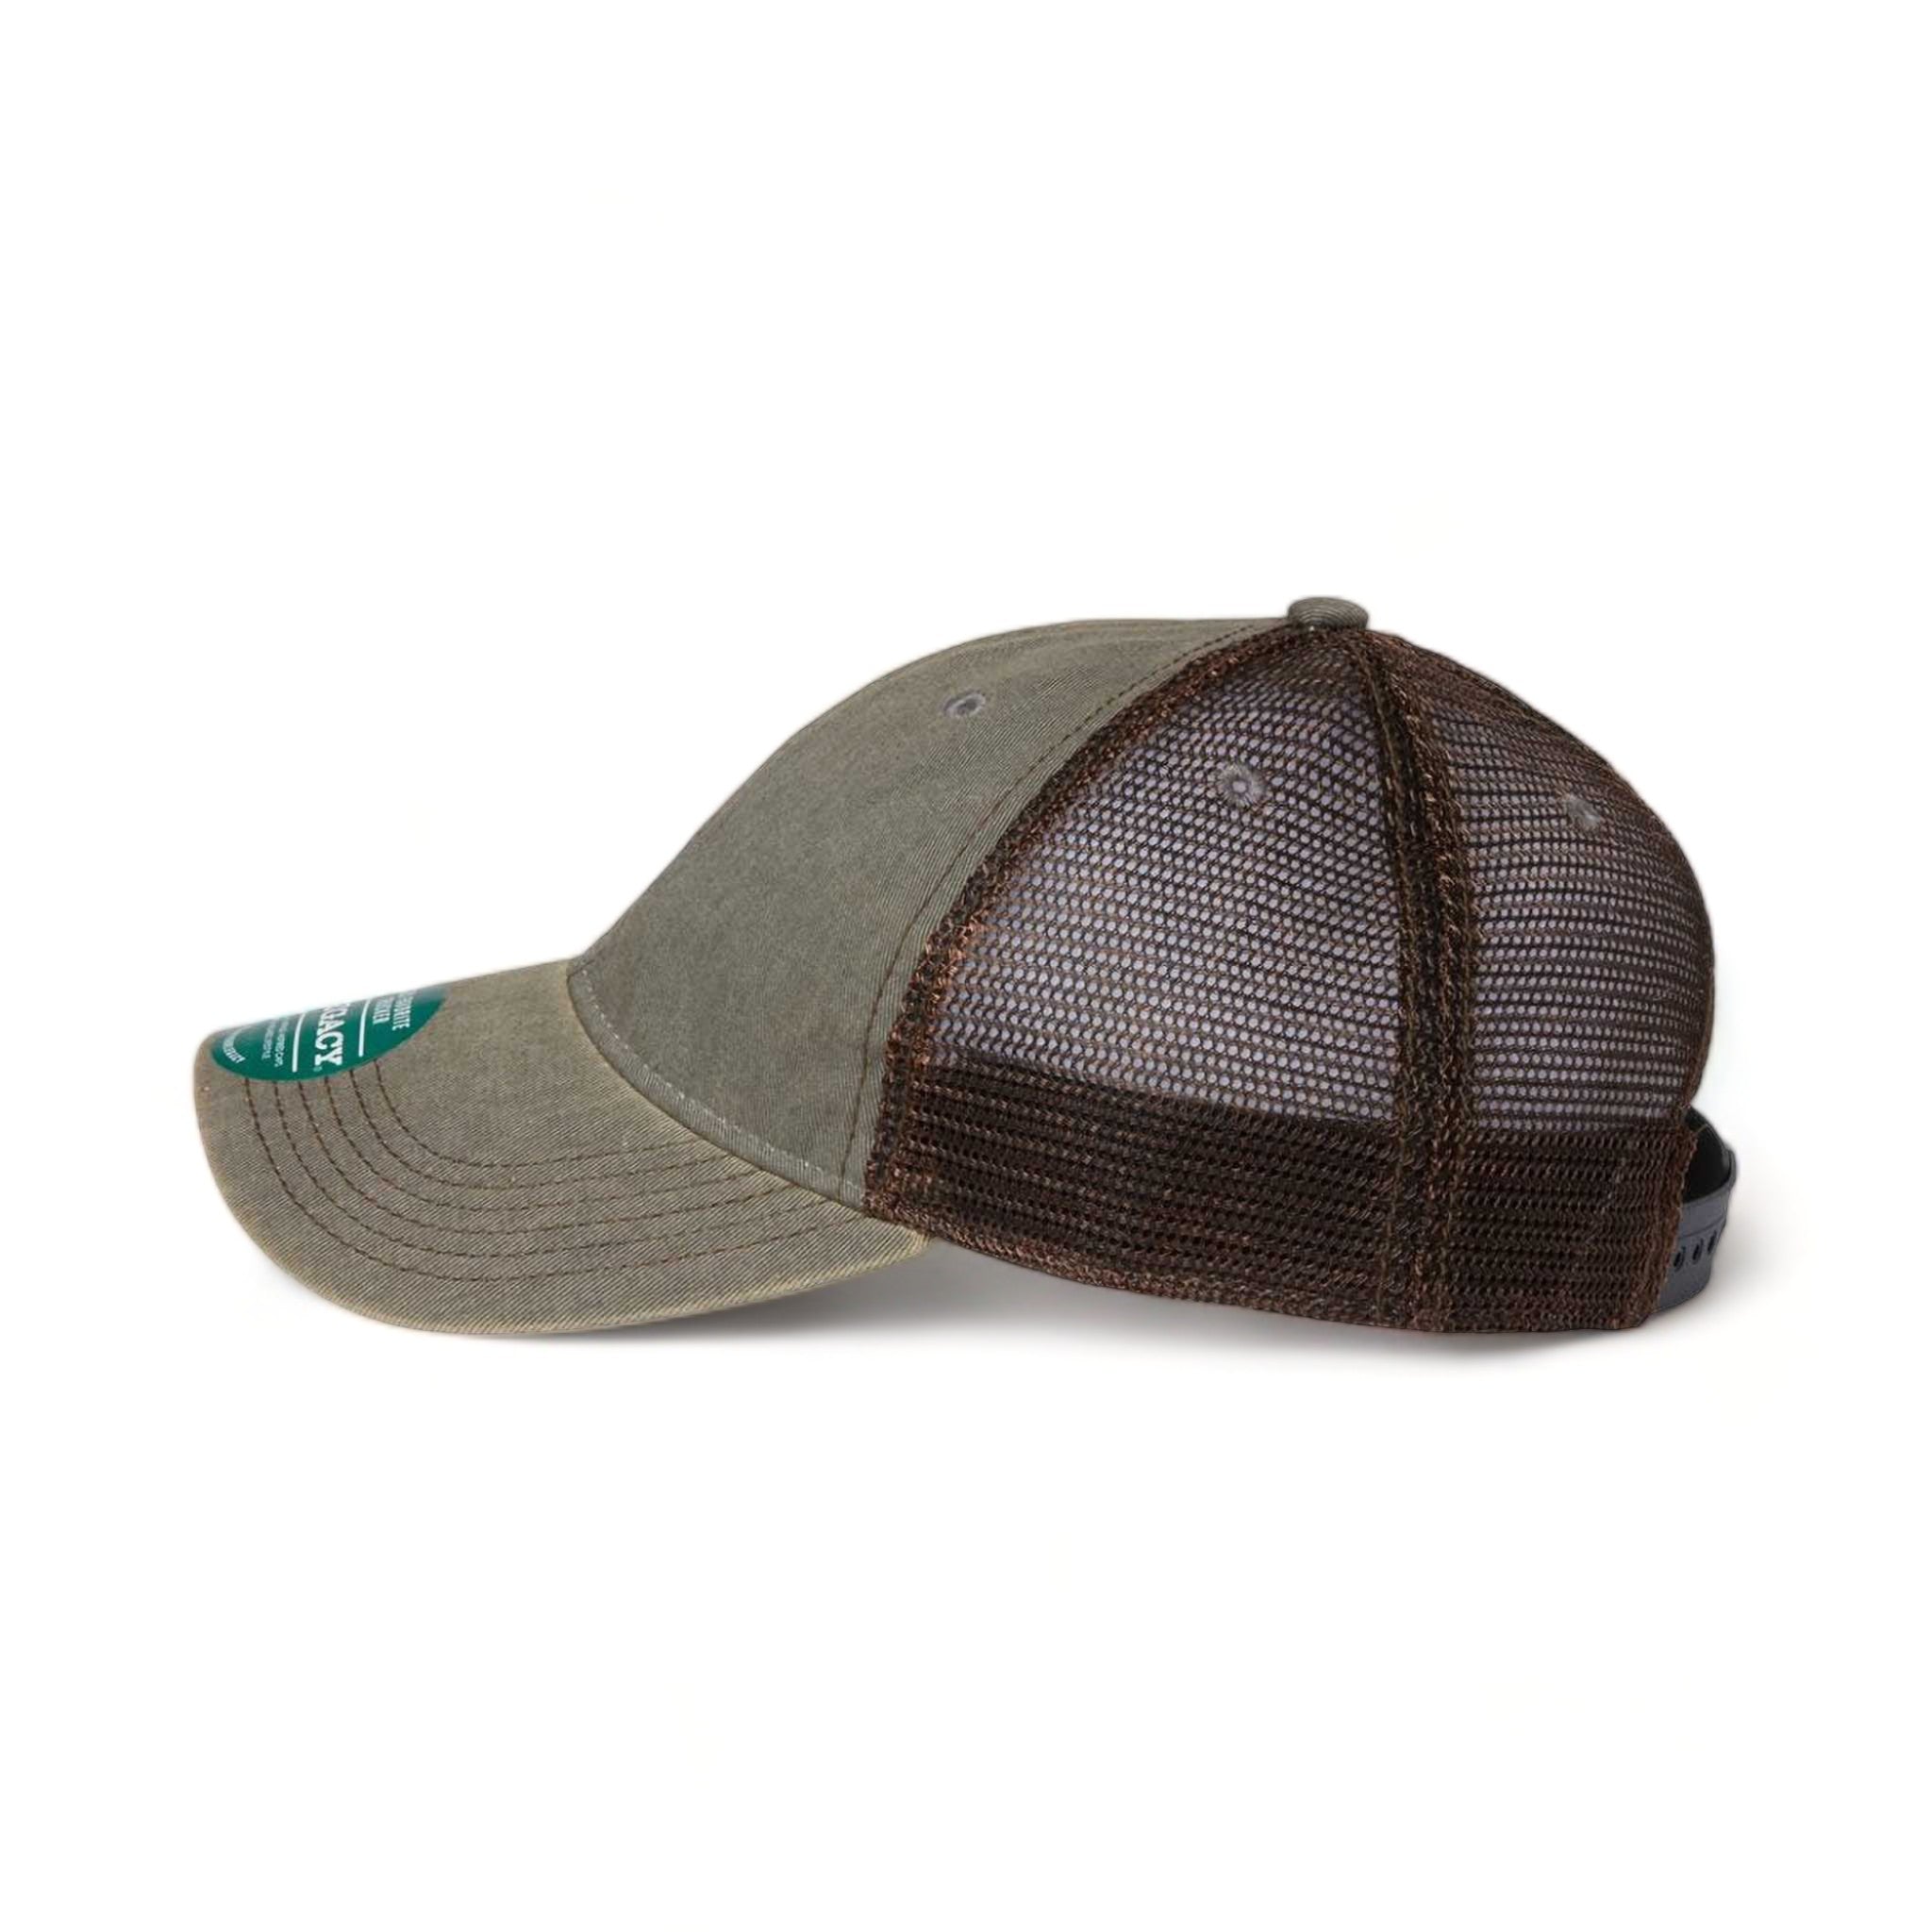 Side view of LEGACY OFA custom hat in grey and brown